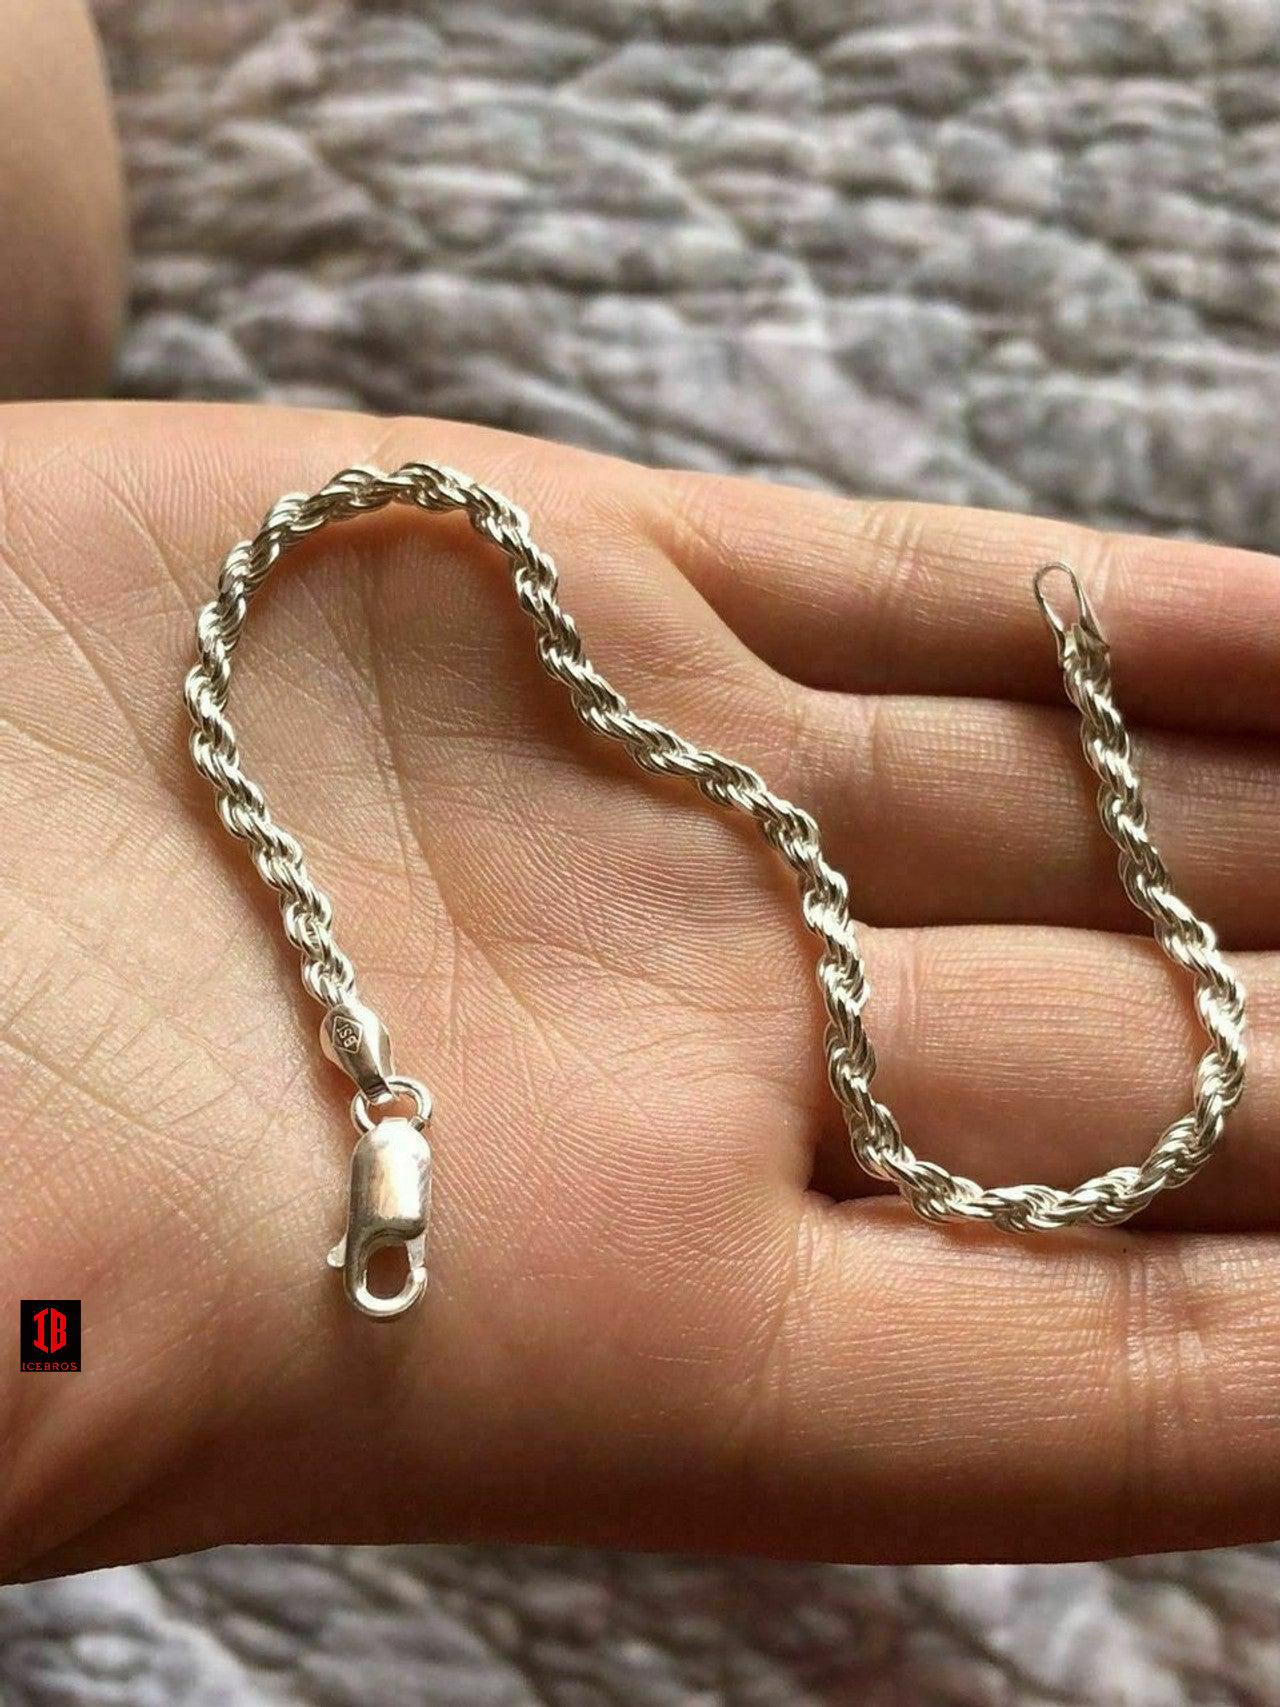 Men's Women’s Solid 925 Sterling Silver Thin Rope Bracelet 7.5” Made In Italy 3mm,5mm